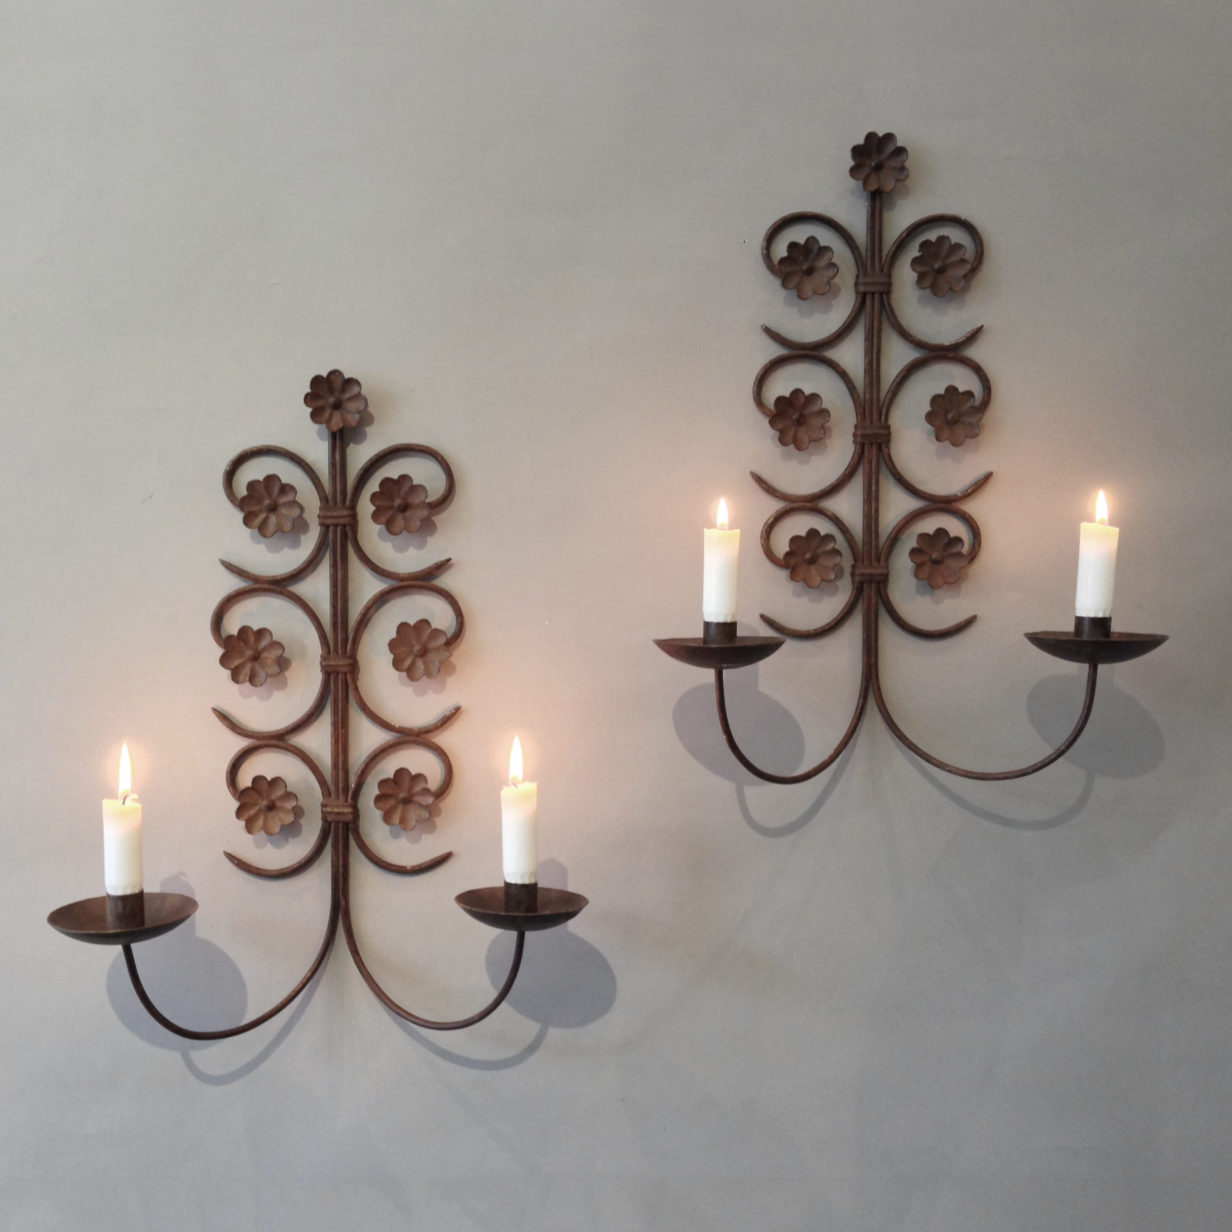 A pair of cheverny scrolling iron wall appliques